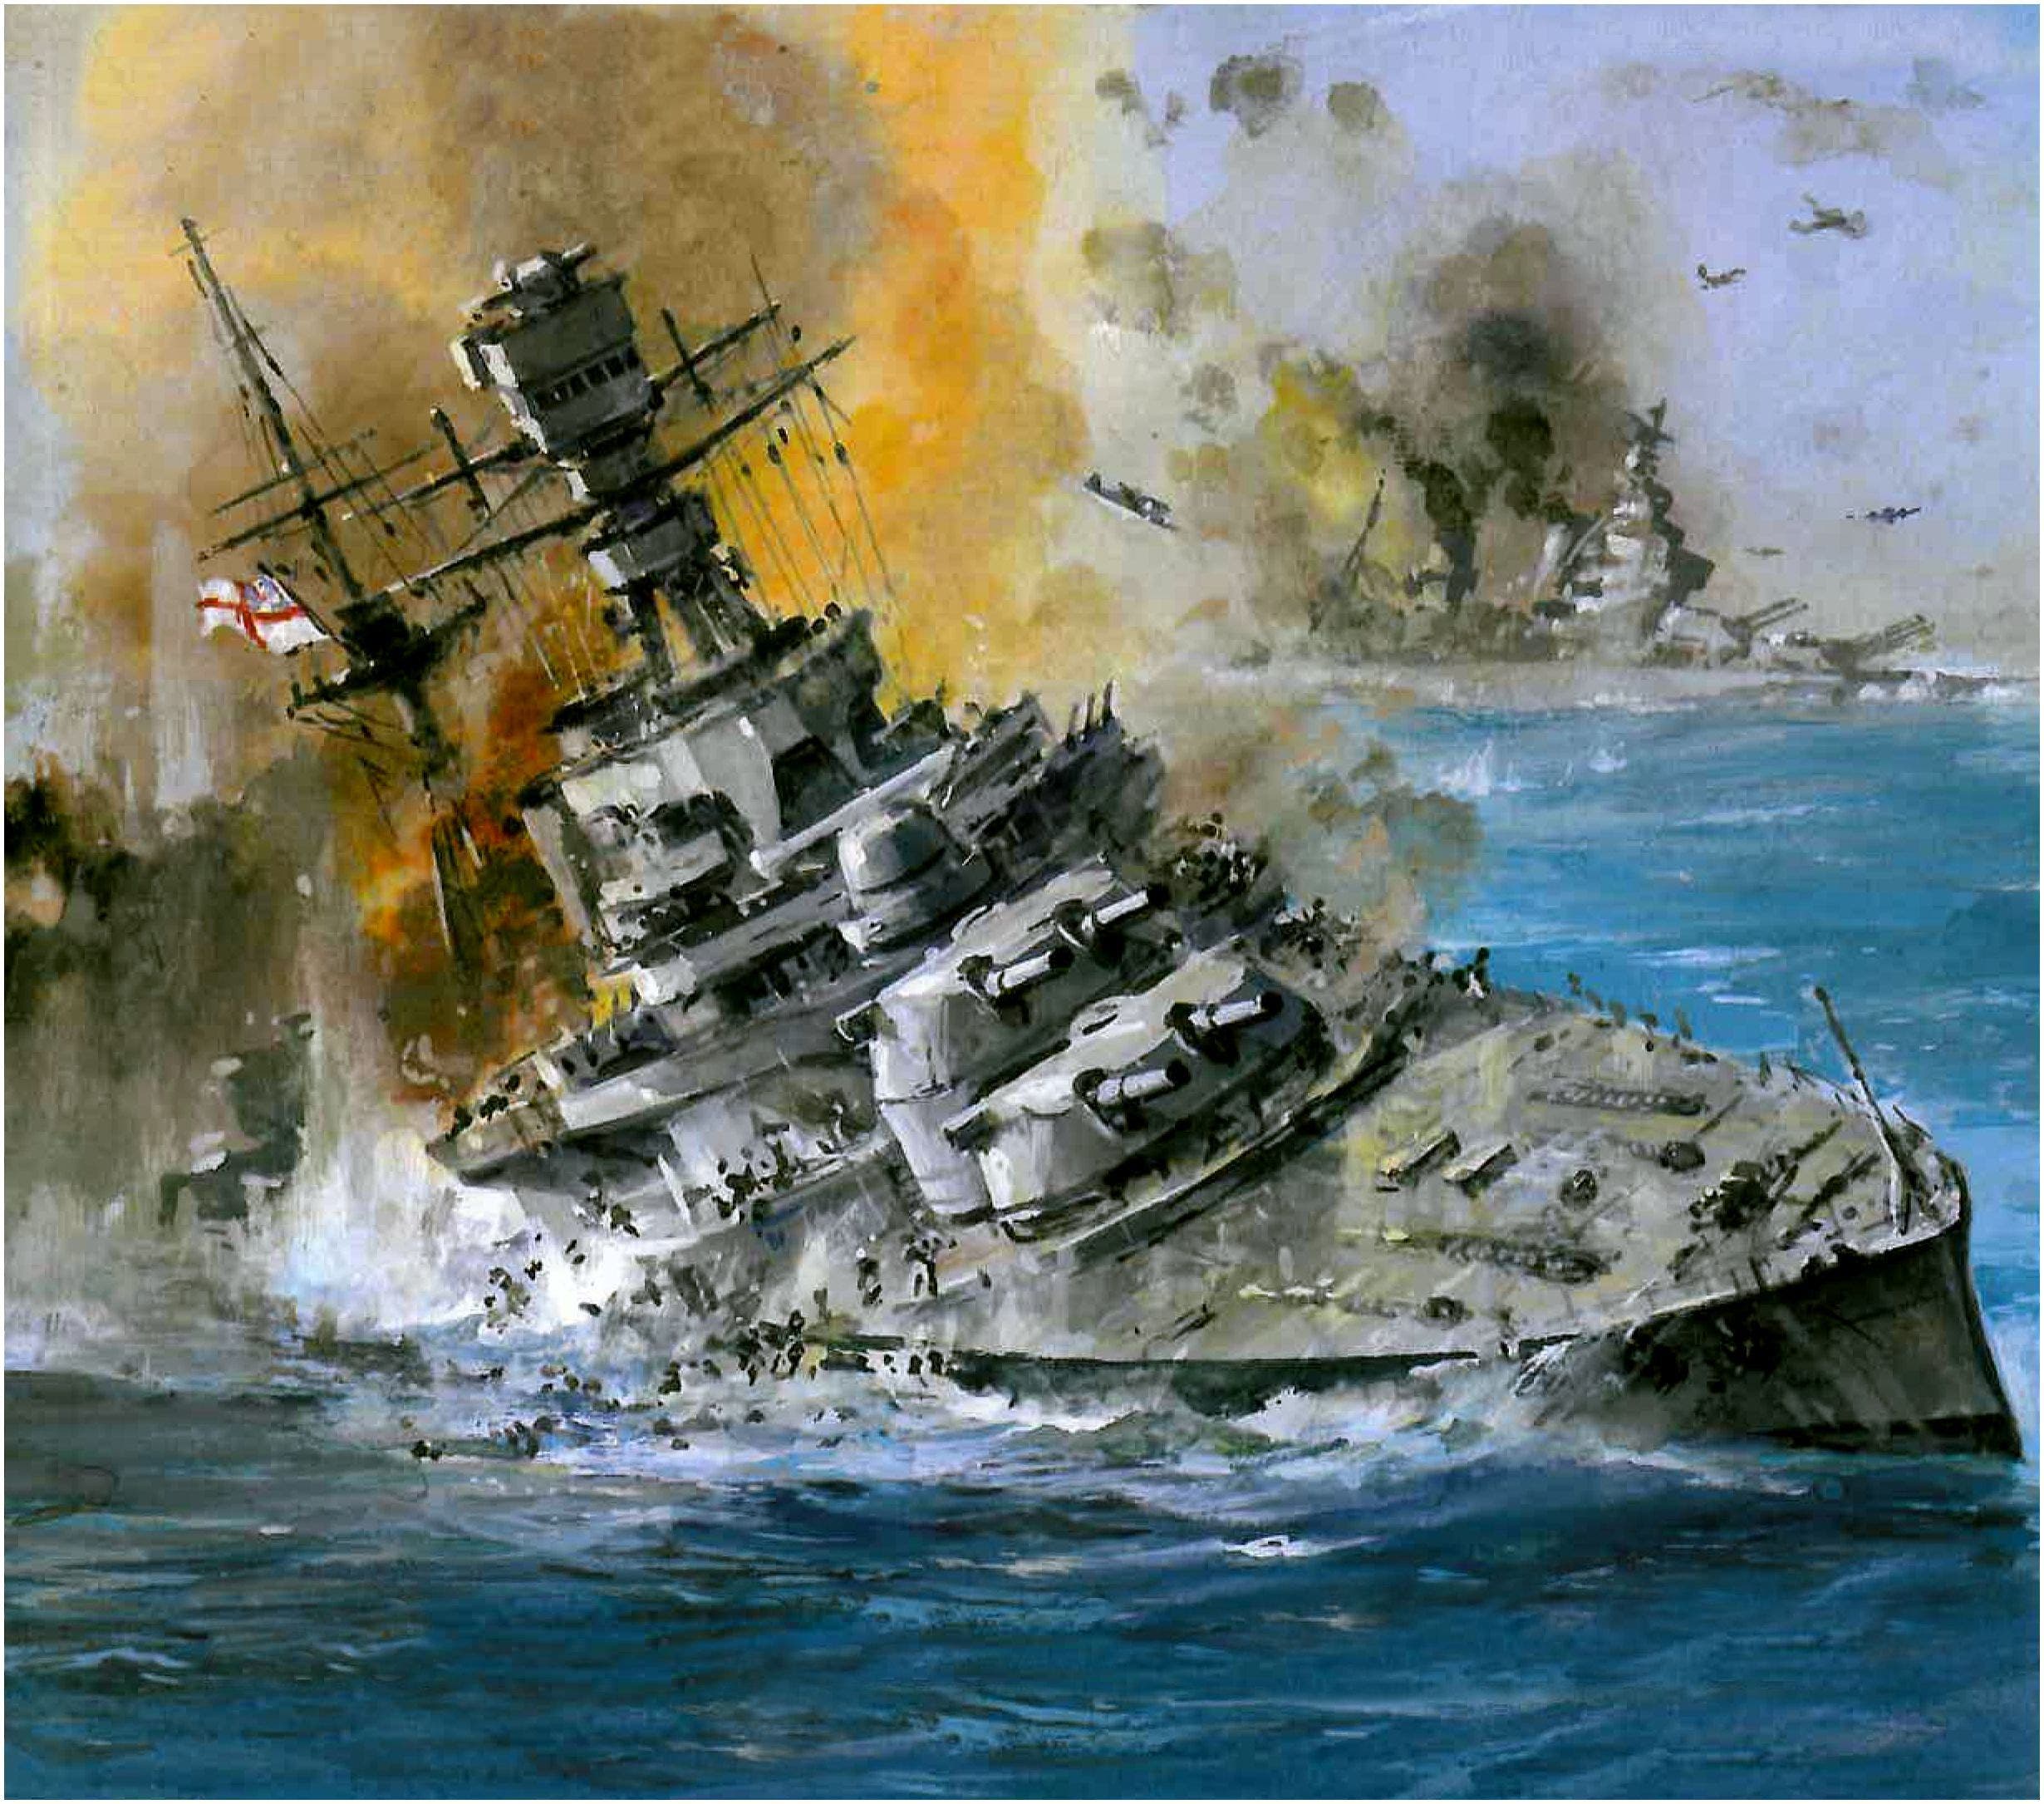 Painting depicting the sinking of the two British ships